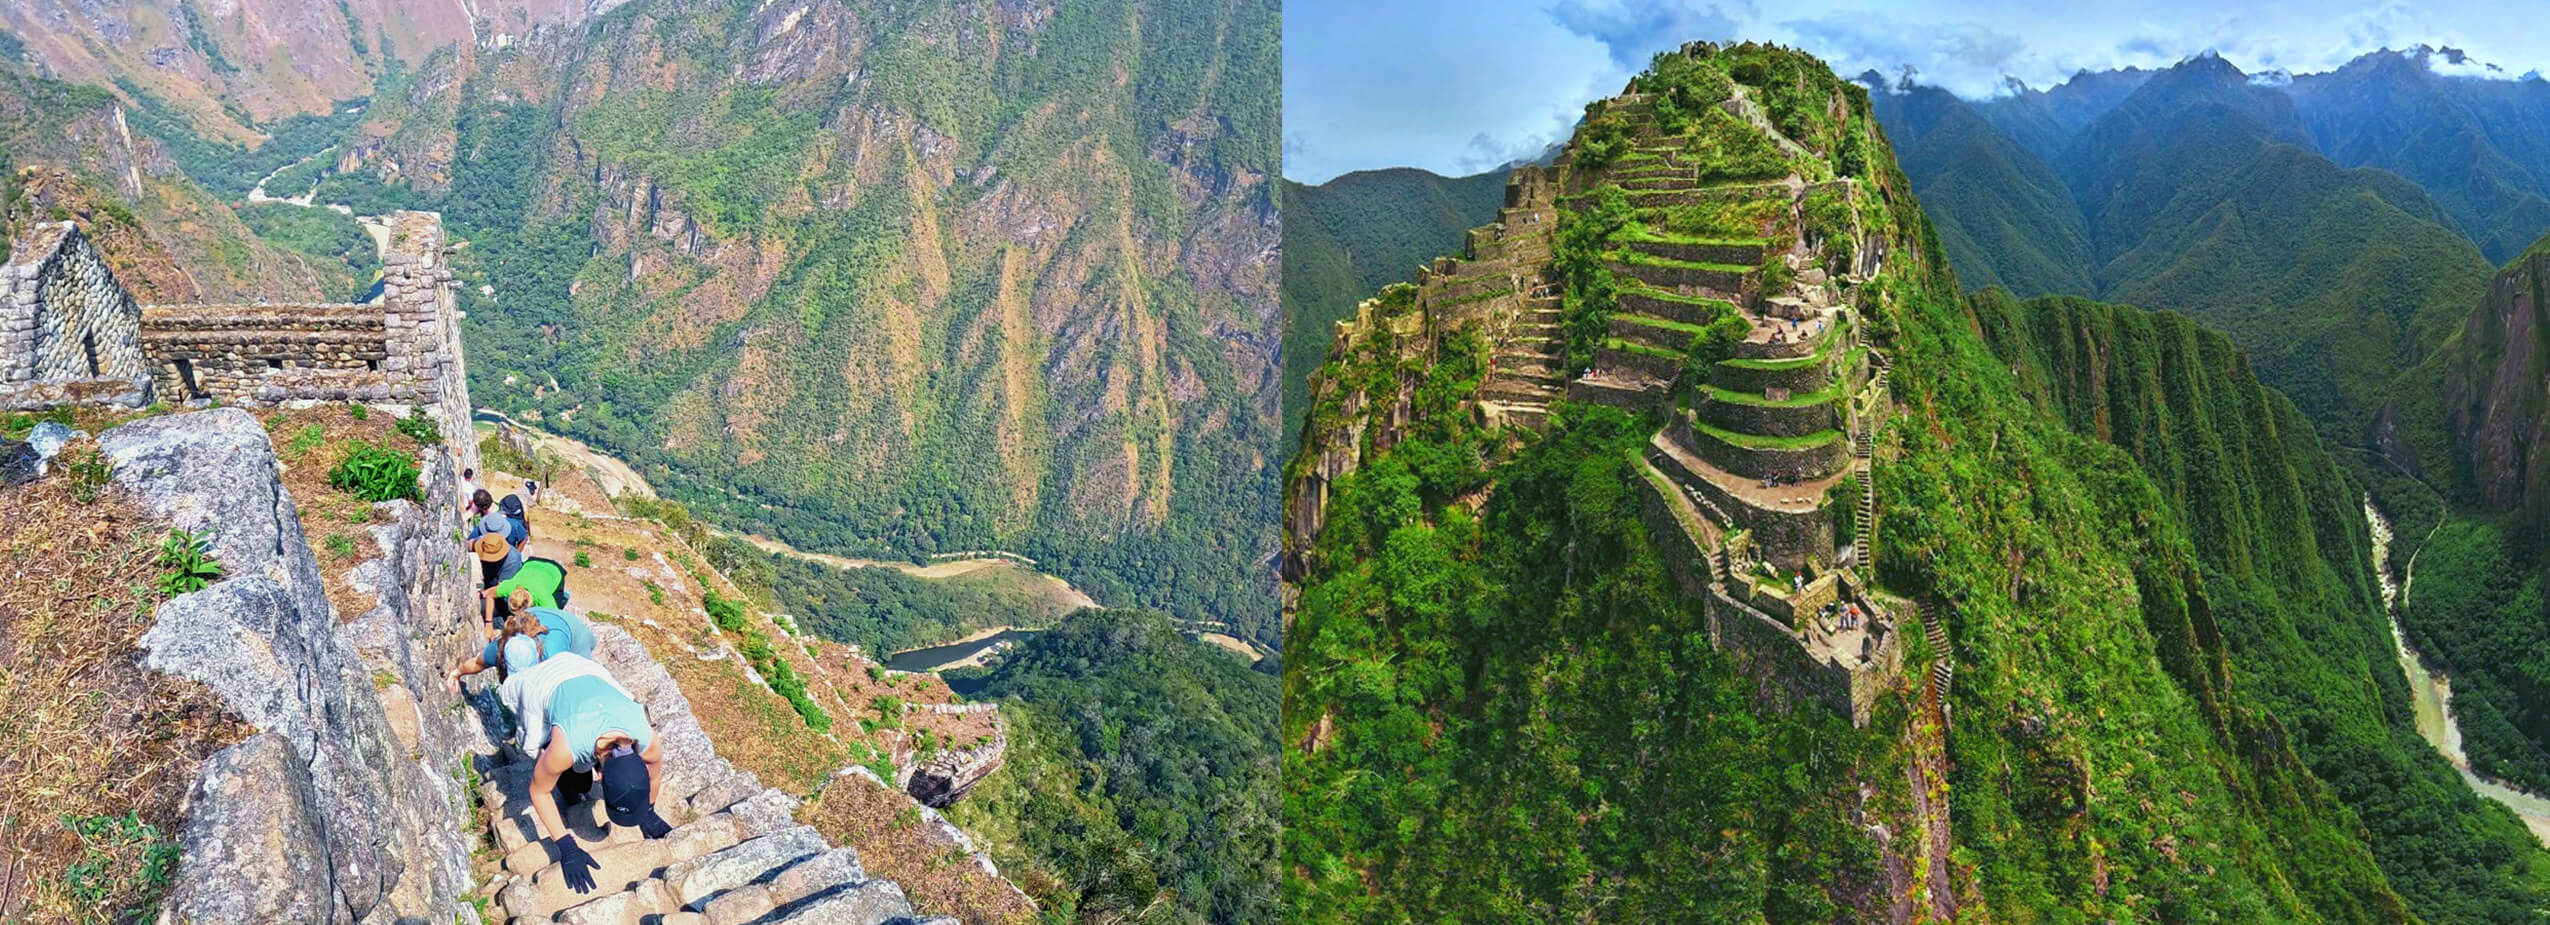 Huayna Picchu: The mountain that challenges your limits